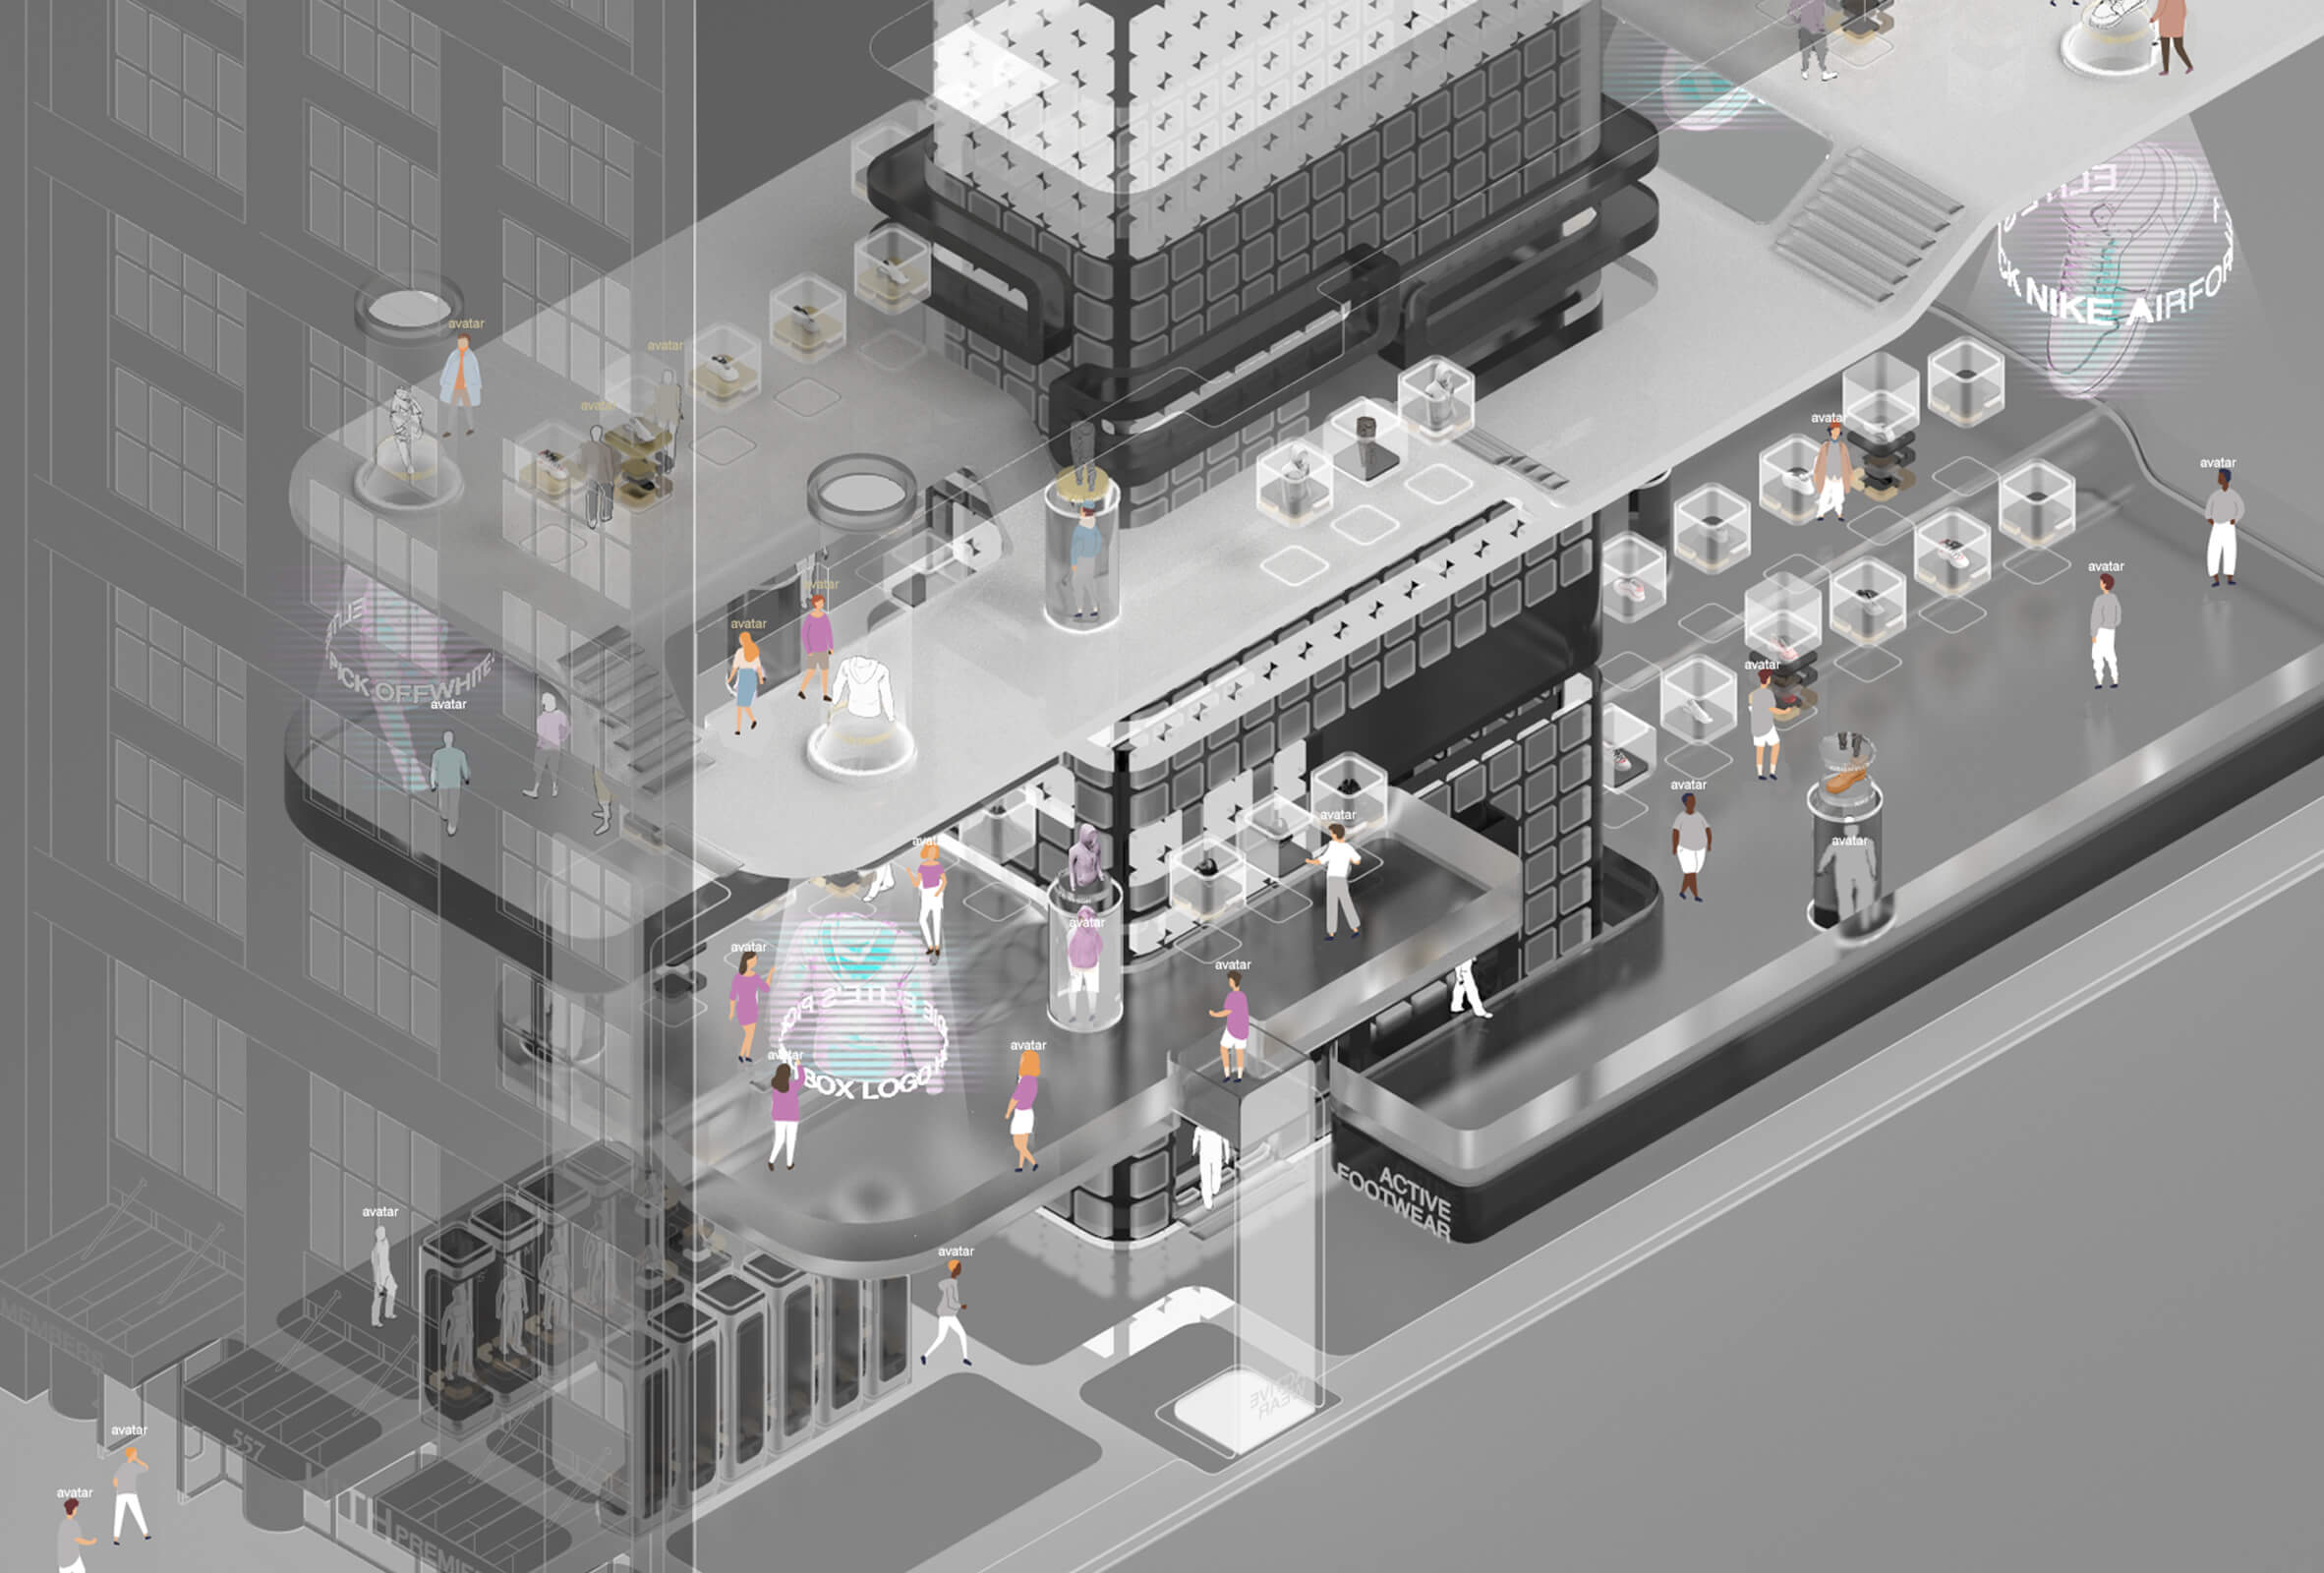 An interior design schematic rendered in black and white wireframes along colored accents. There are people doing various activities in the different areas of the space.